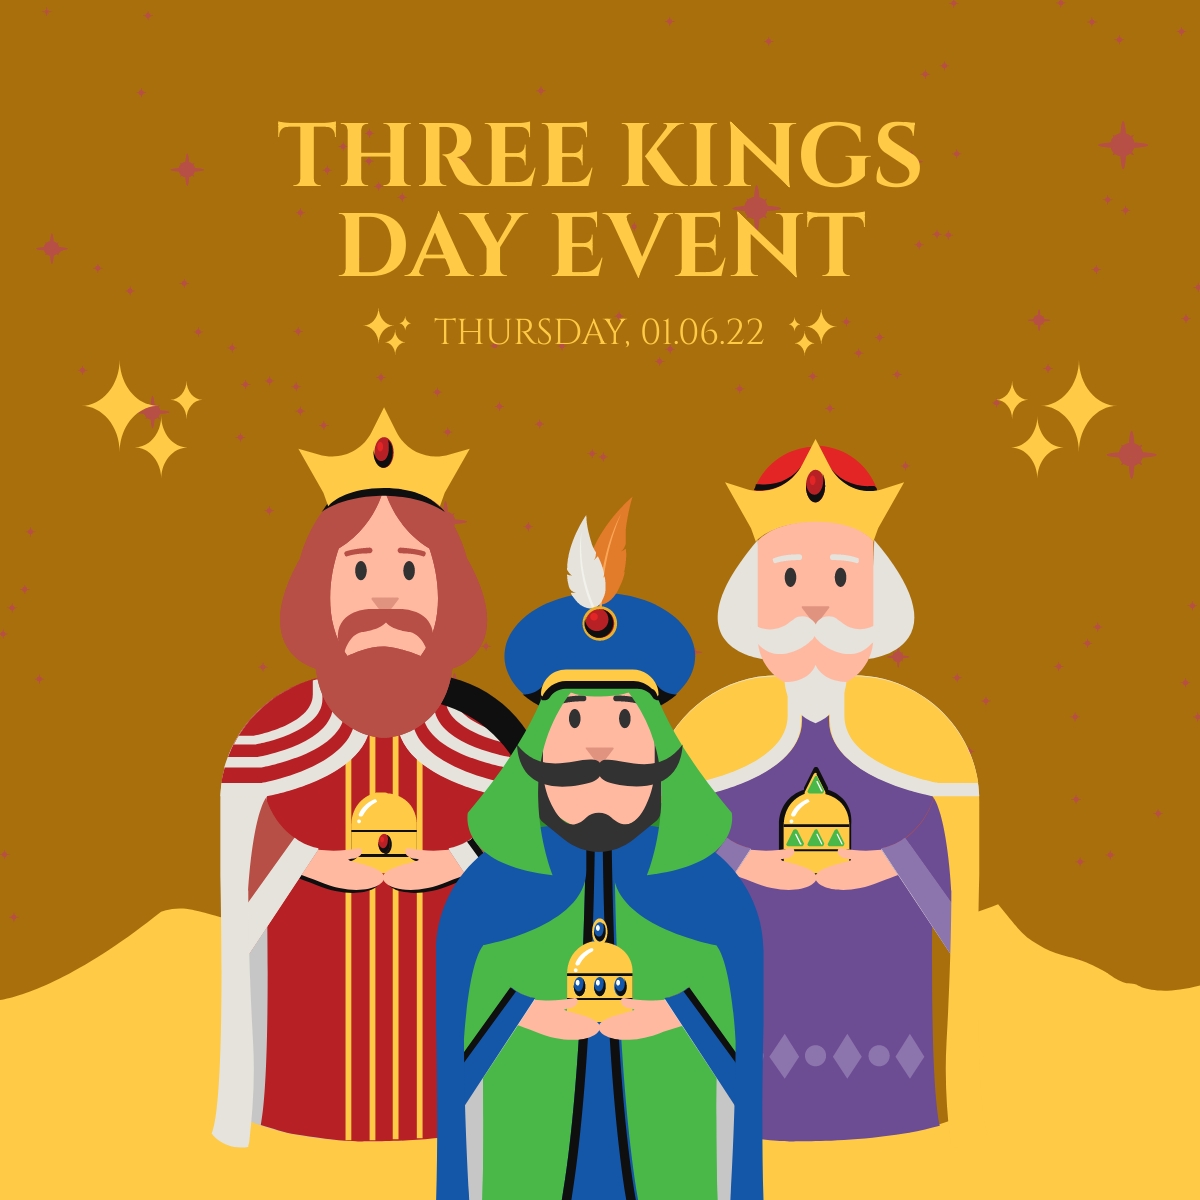 free-three-kings-day-template-download-in-jpg-png-template